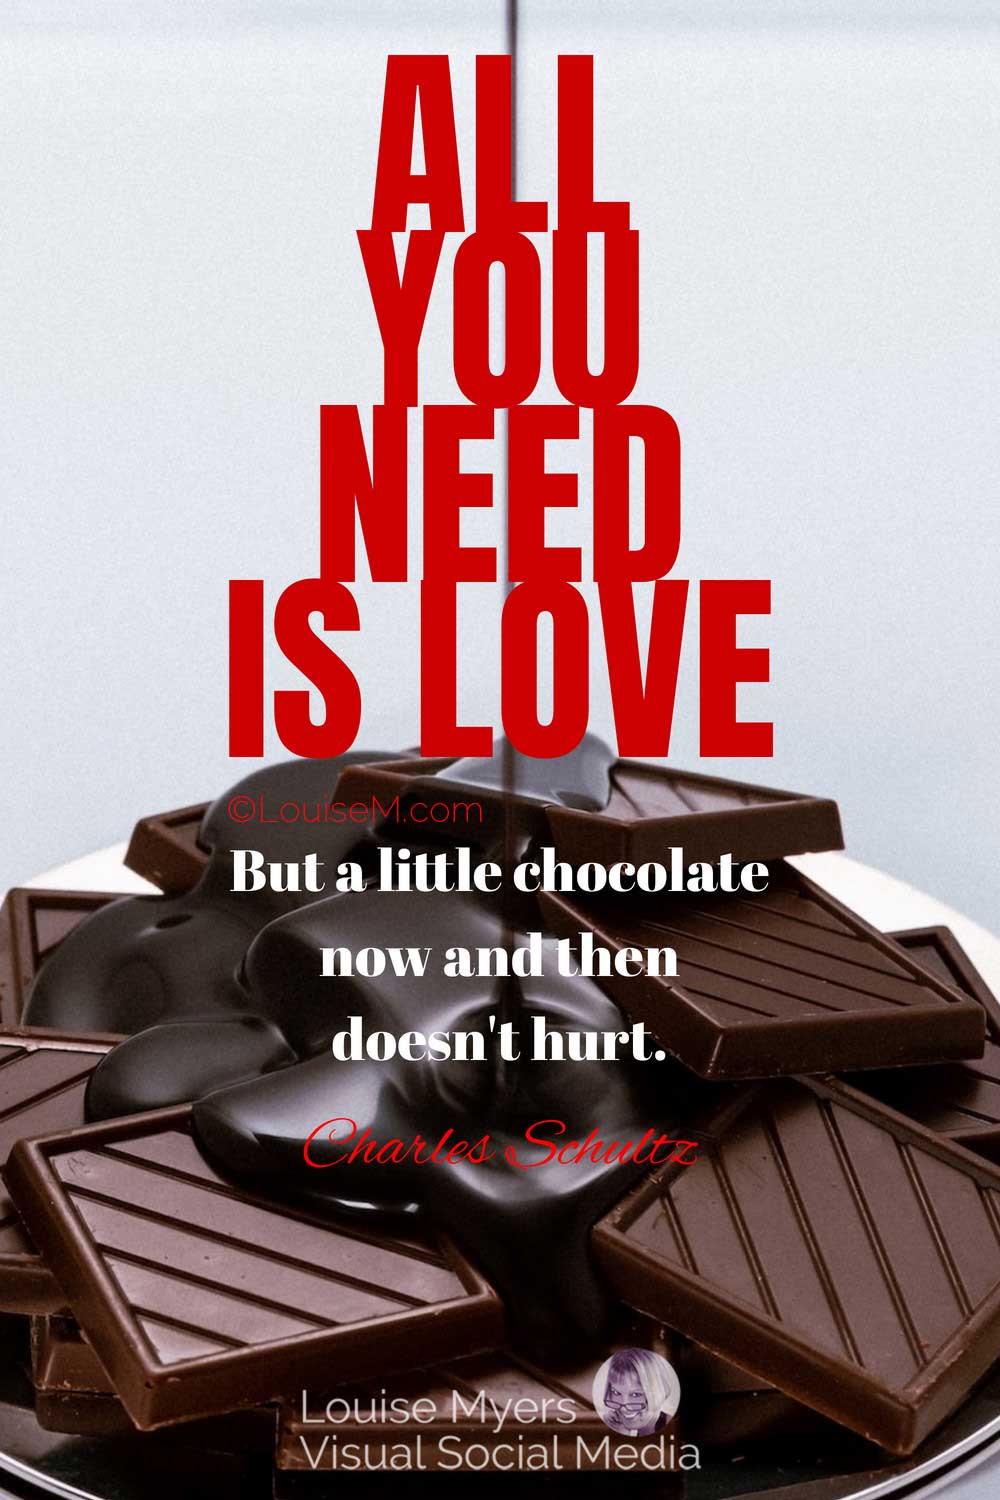 plateful of dark chocolates has quote saying All you need is love, But a little chocolate now and then doesn't hurt.